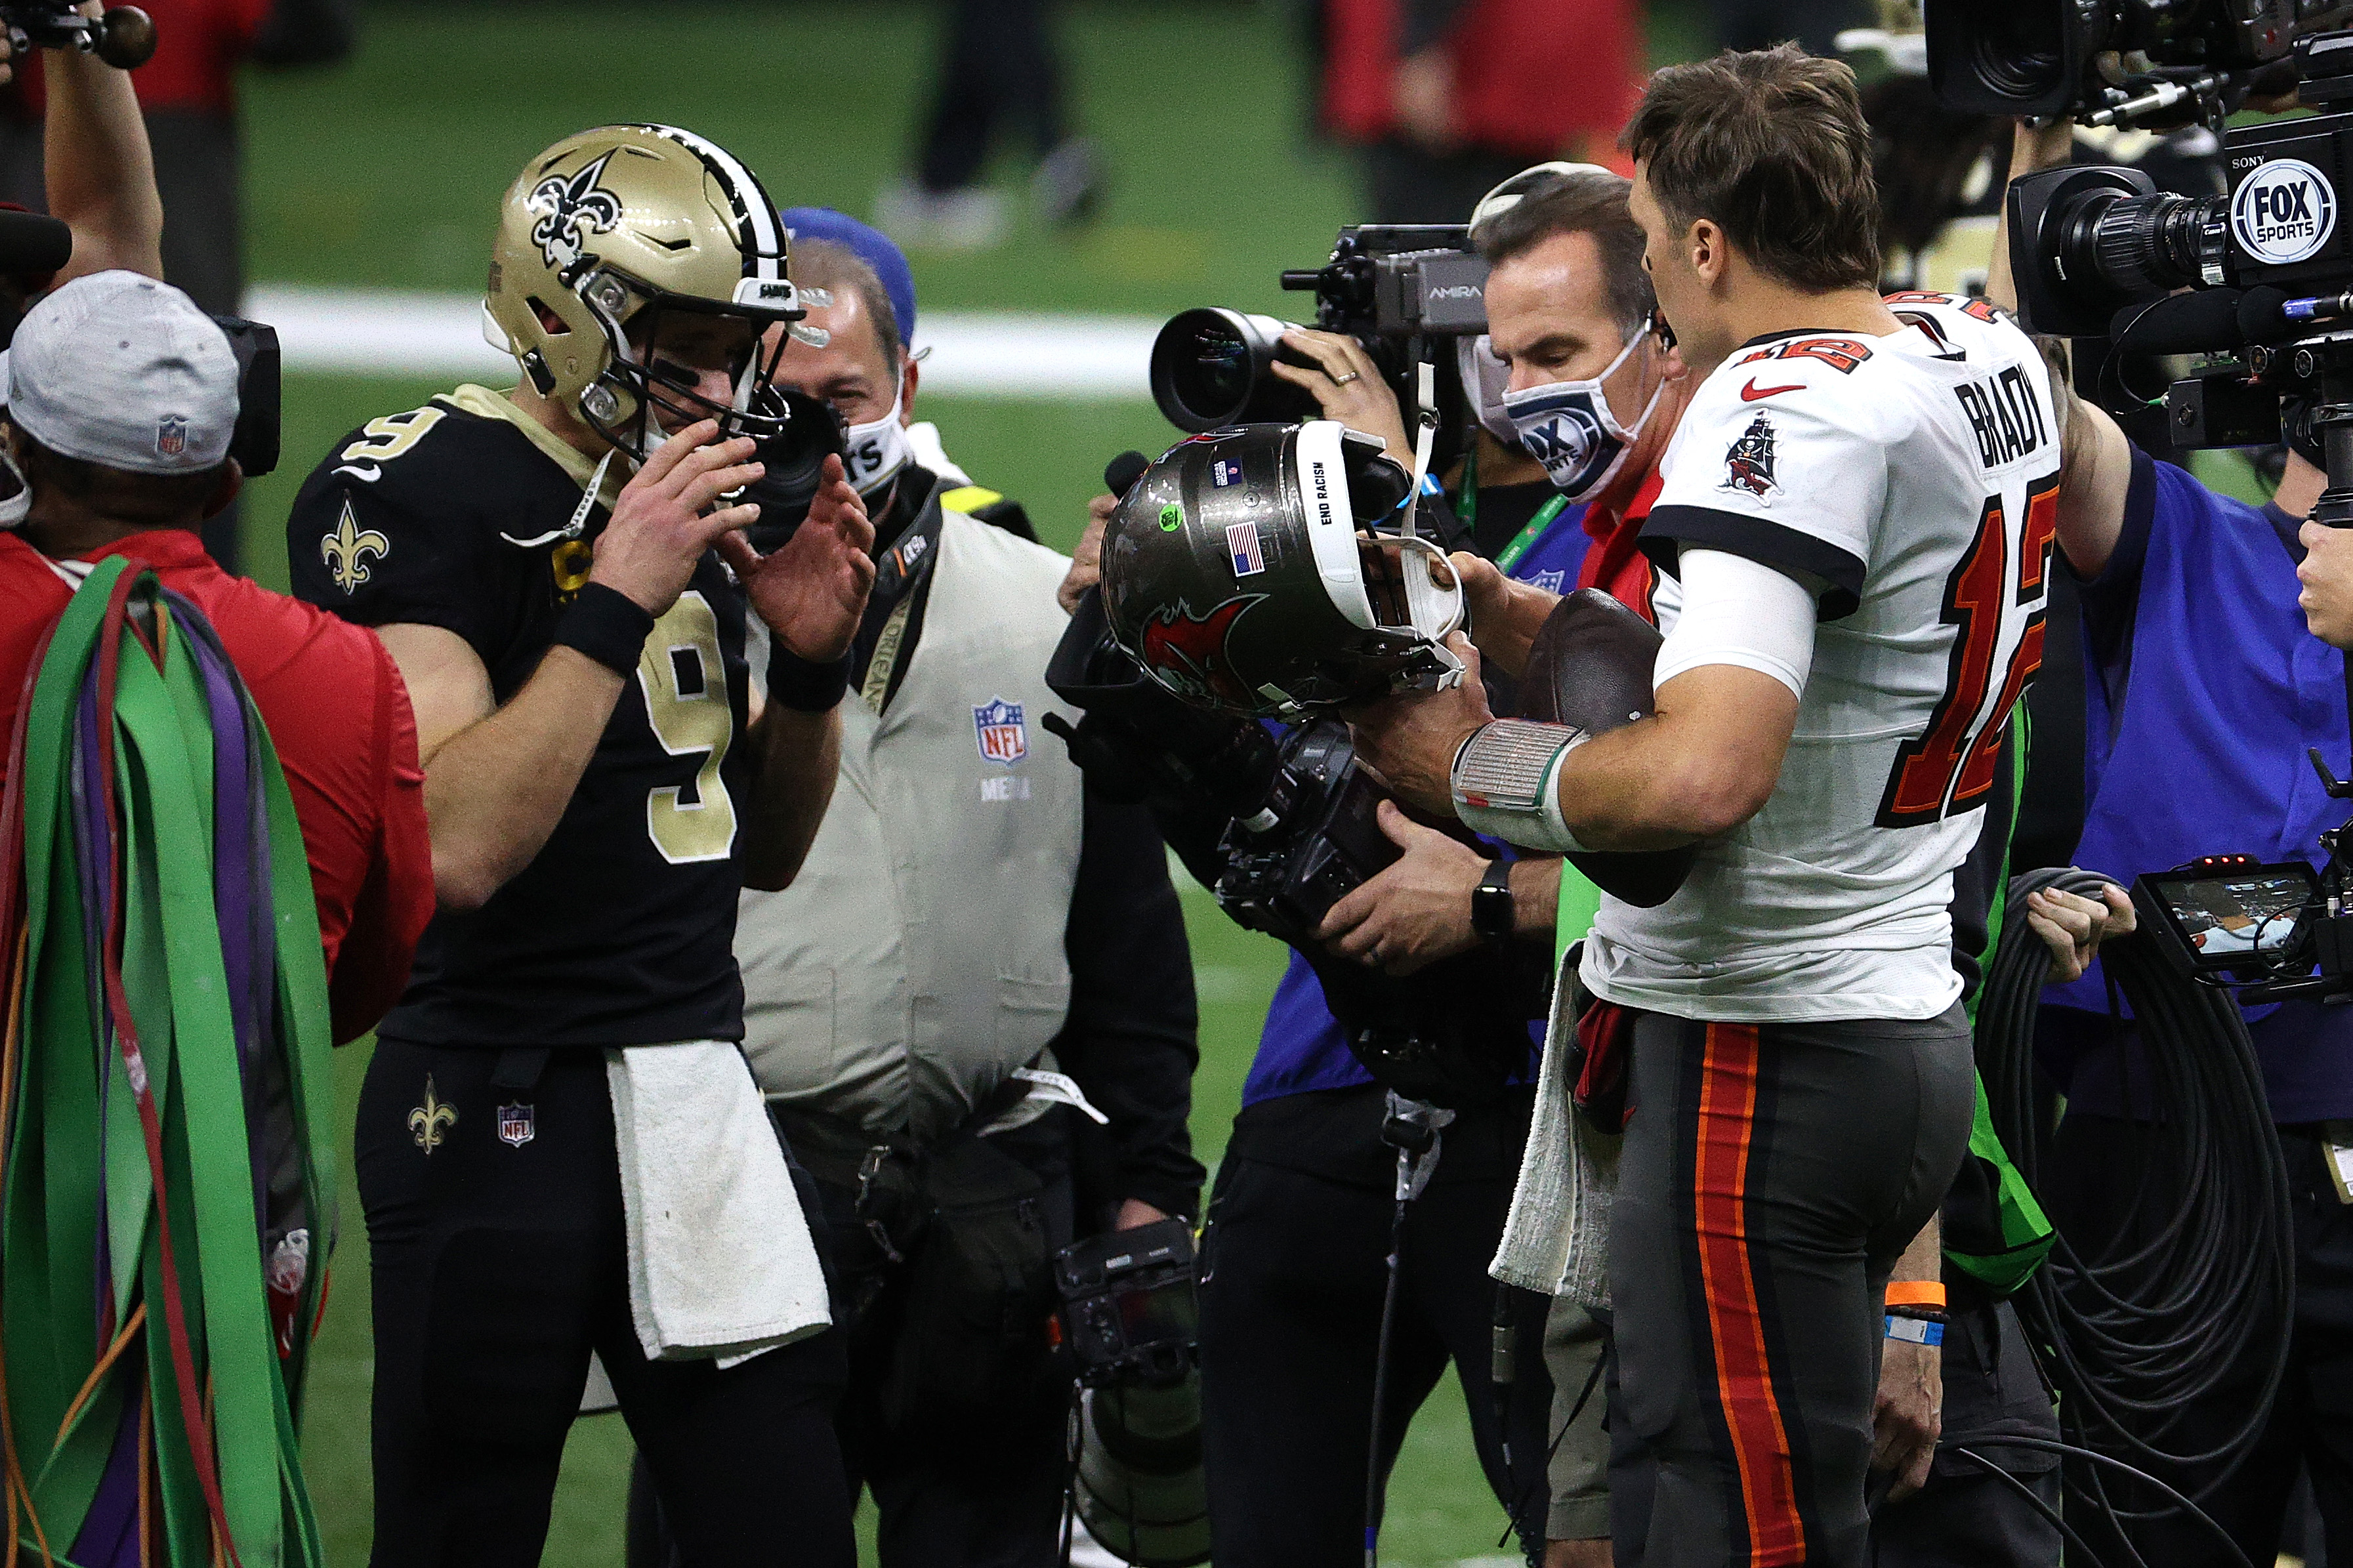 Drew Brees overtakes Tom Brady for career touchdown lead